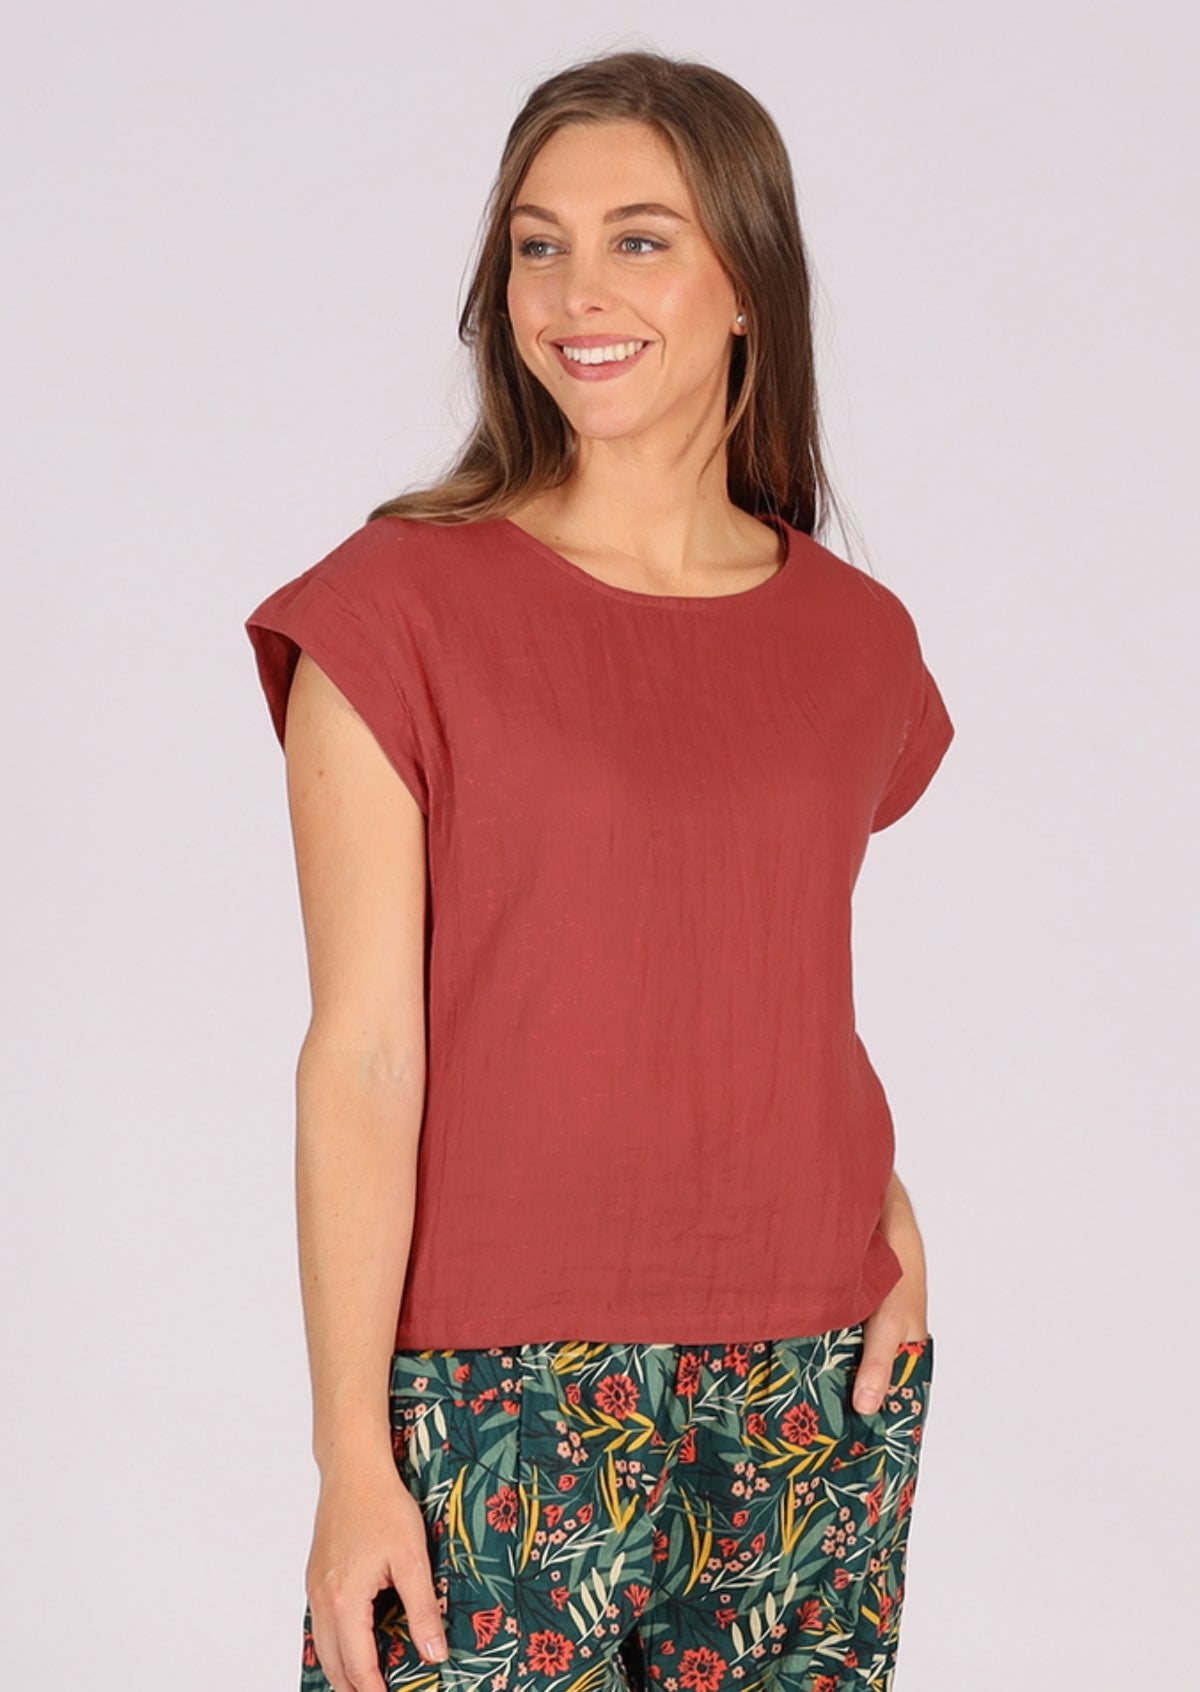 Cap sleeves, round neck, cotton top sits on hips